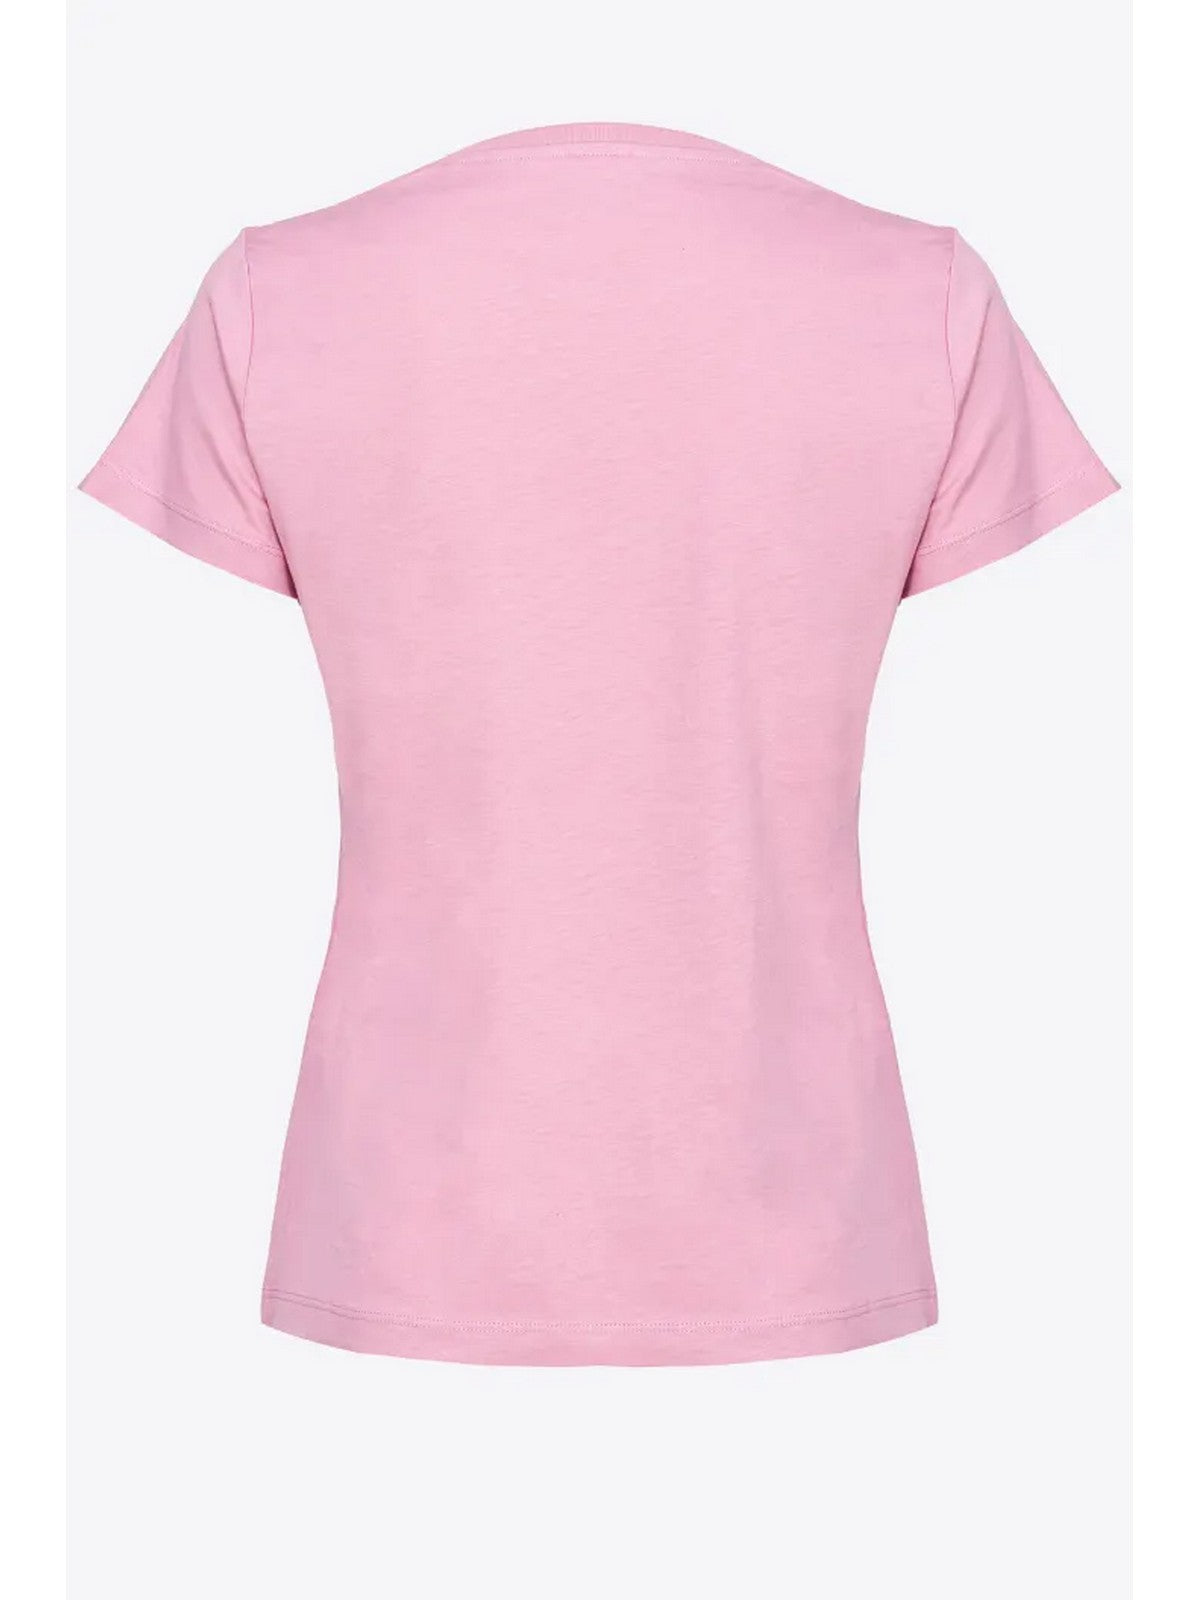 PINKO T-shirt et polo pour femmes 100355-A1NW N98 Pink